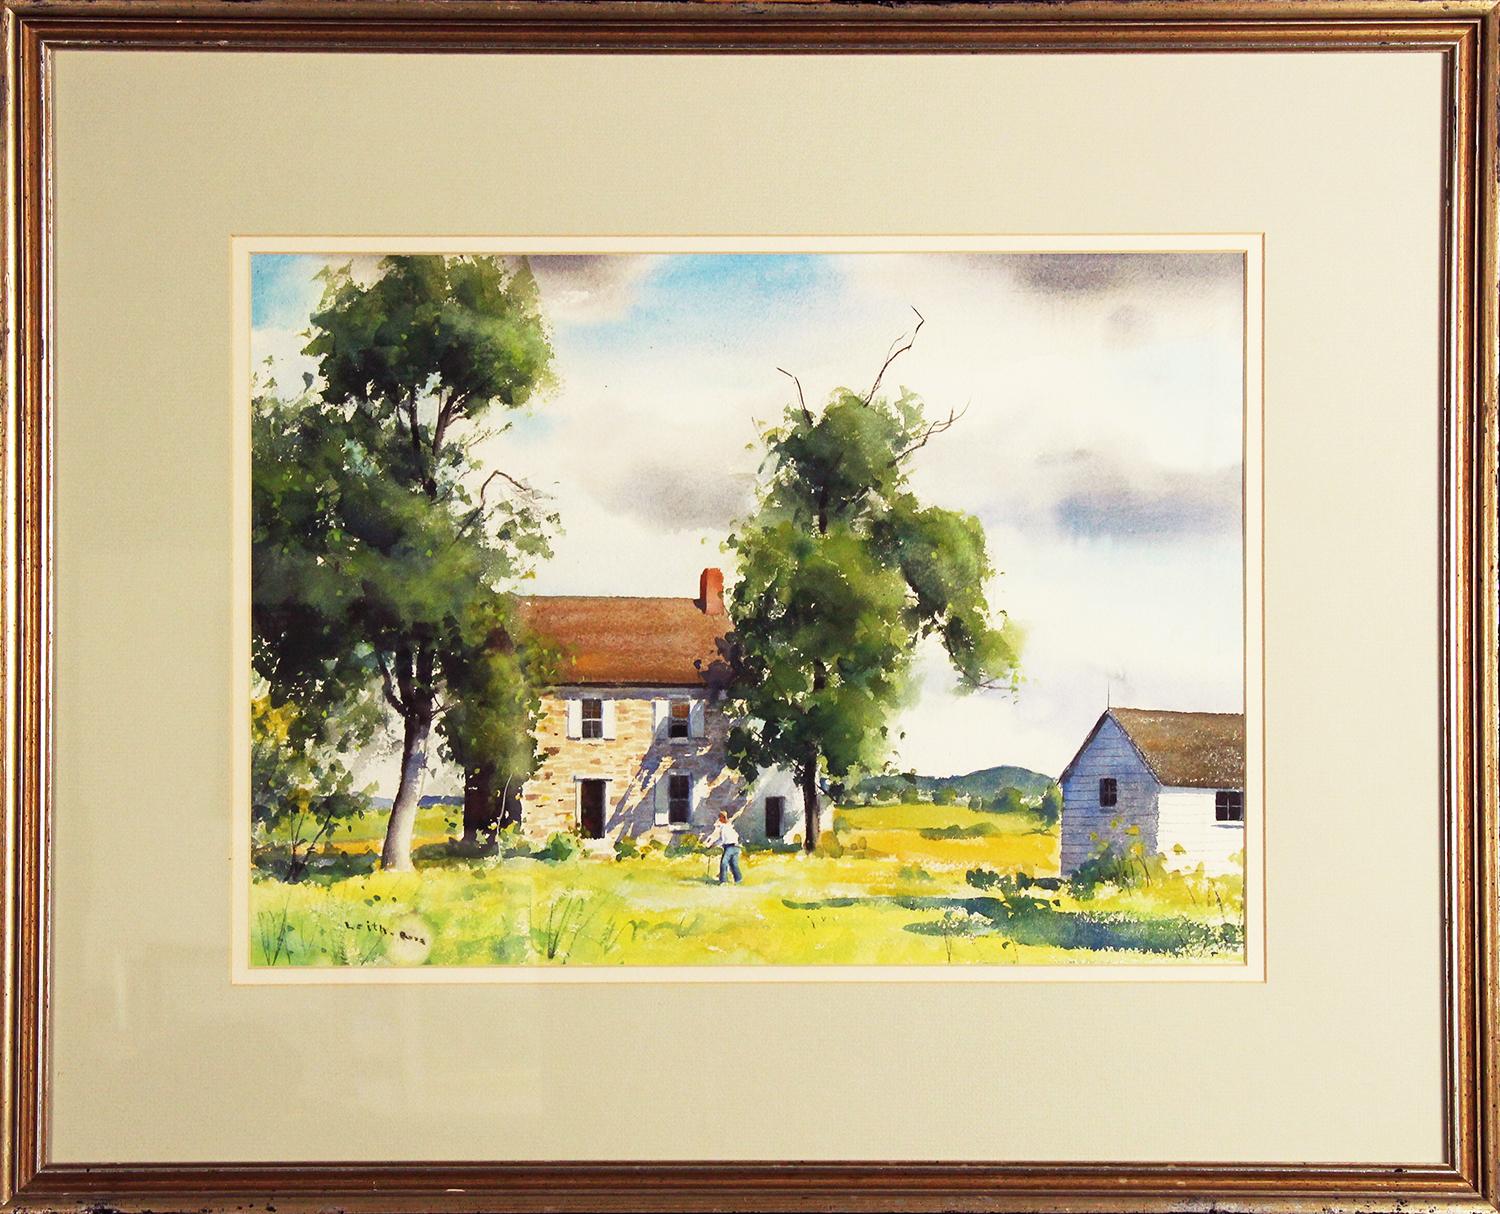 Homestead, Regional American Landscape by Pennsylvania Impressionist - Painting by Harry Leith-Ross